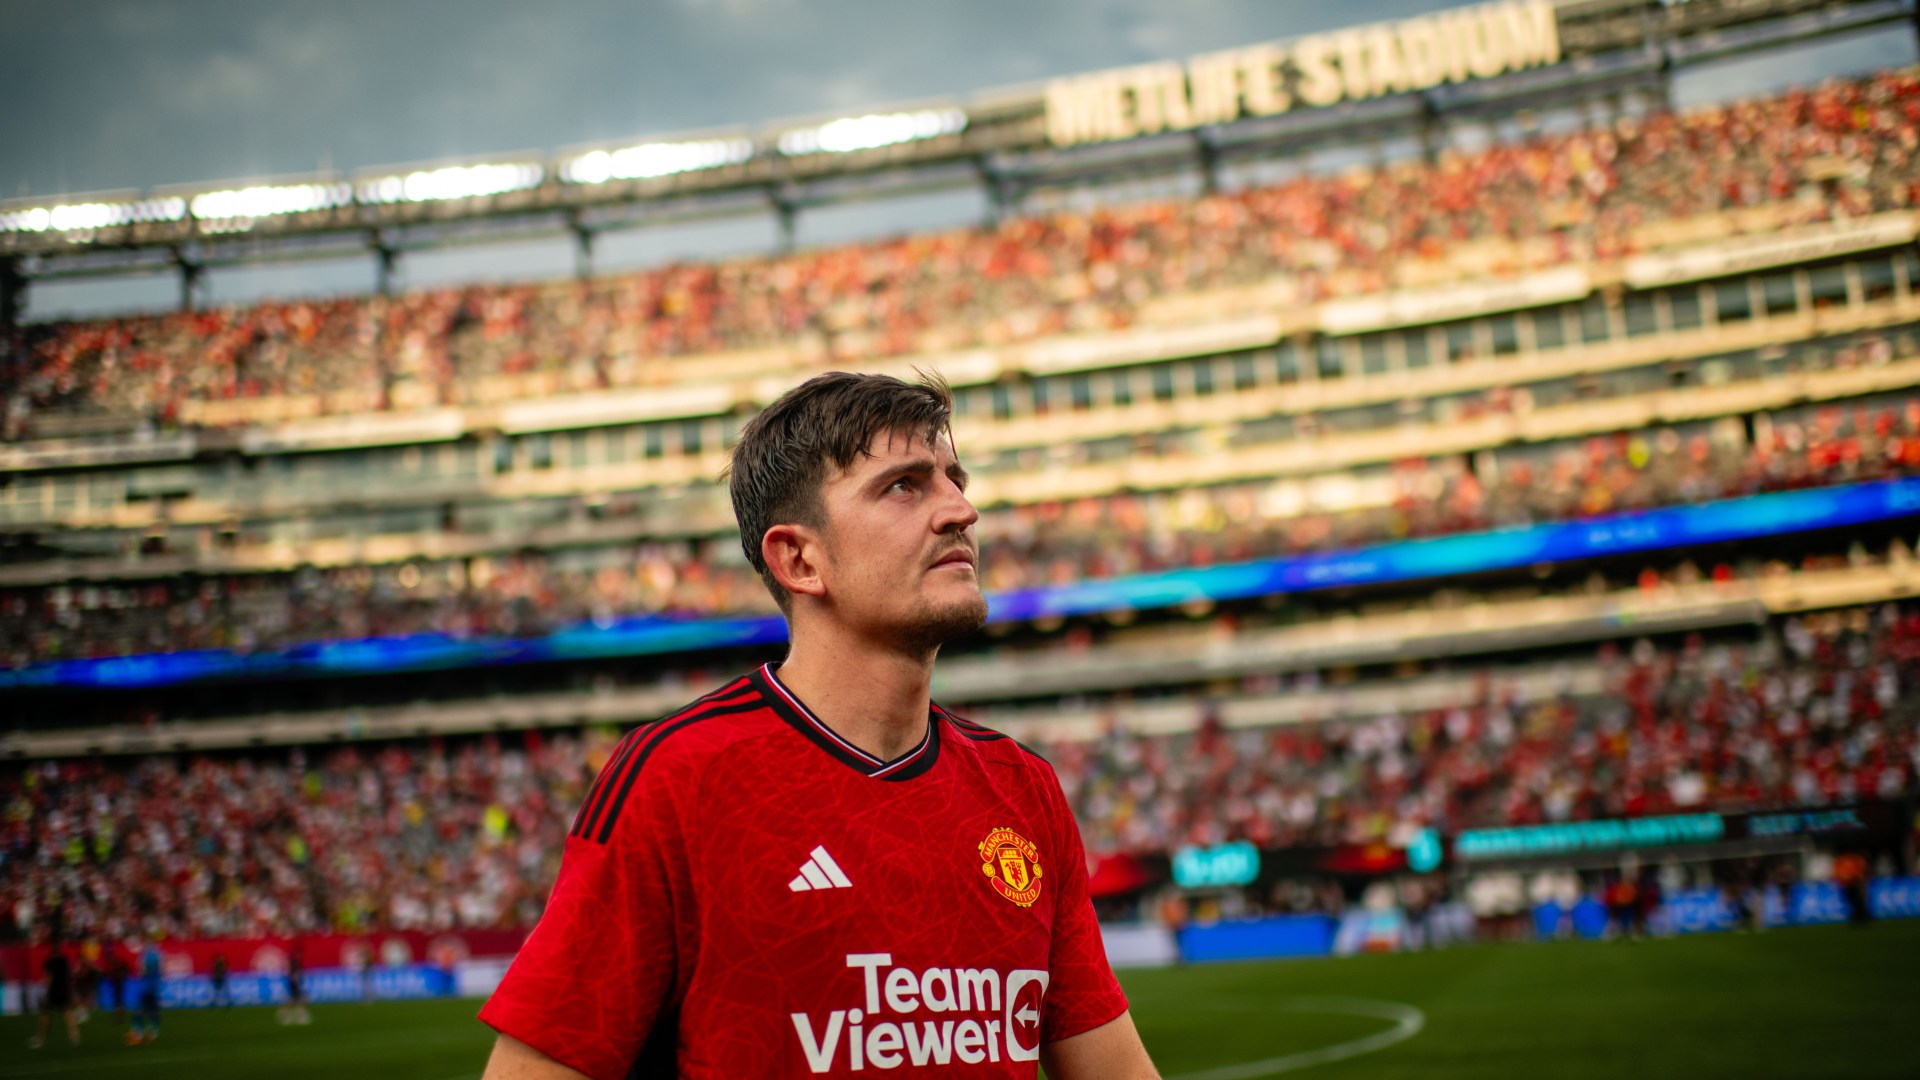 Erik ten Hag names Tom Heaton as Manchester United captain for friendly as Harry Maguire starts